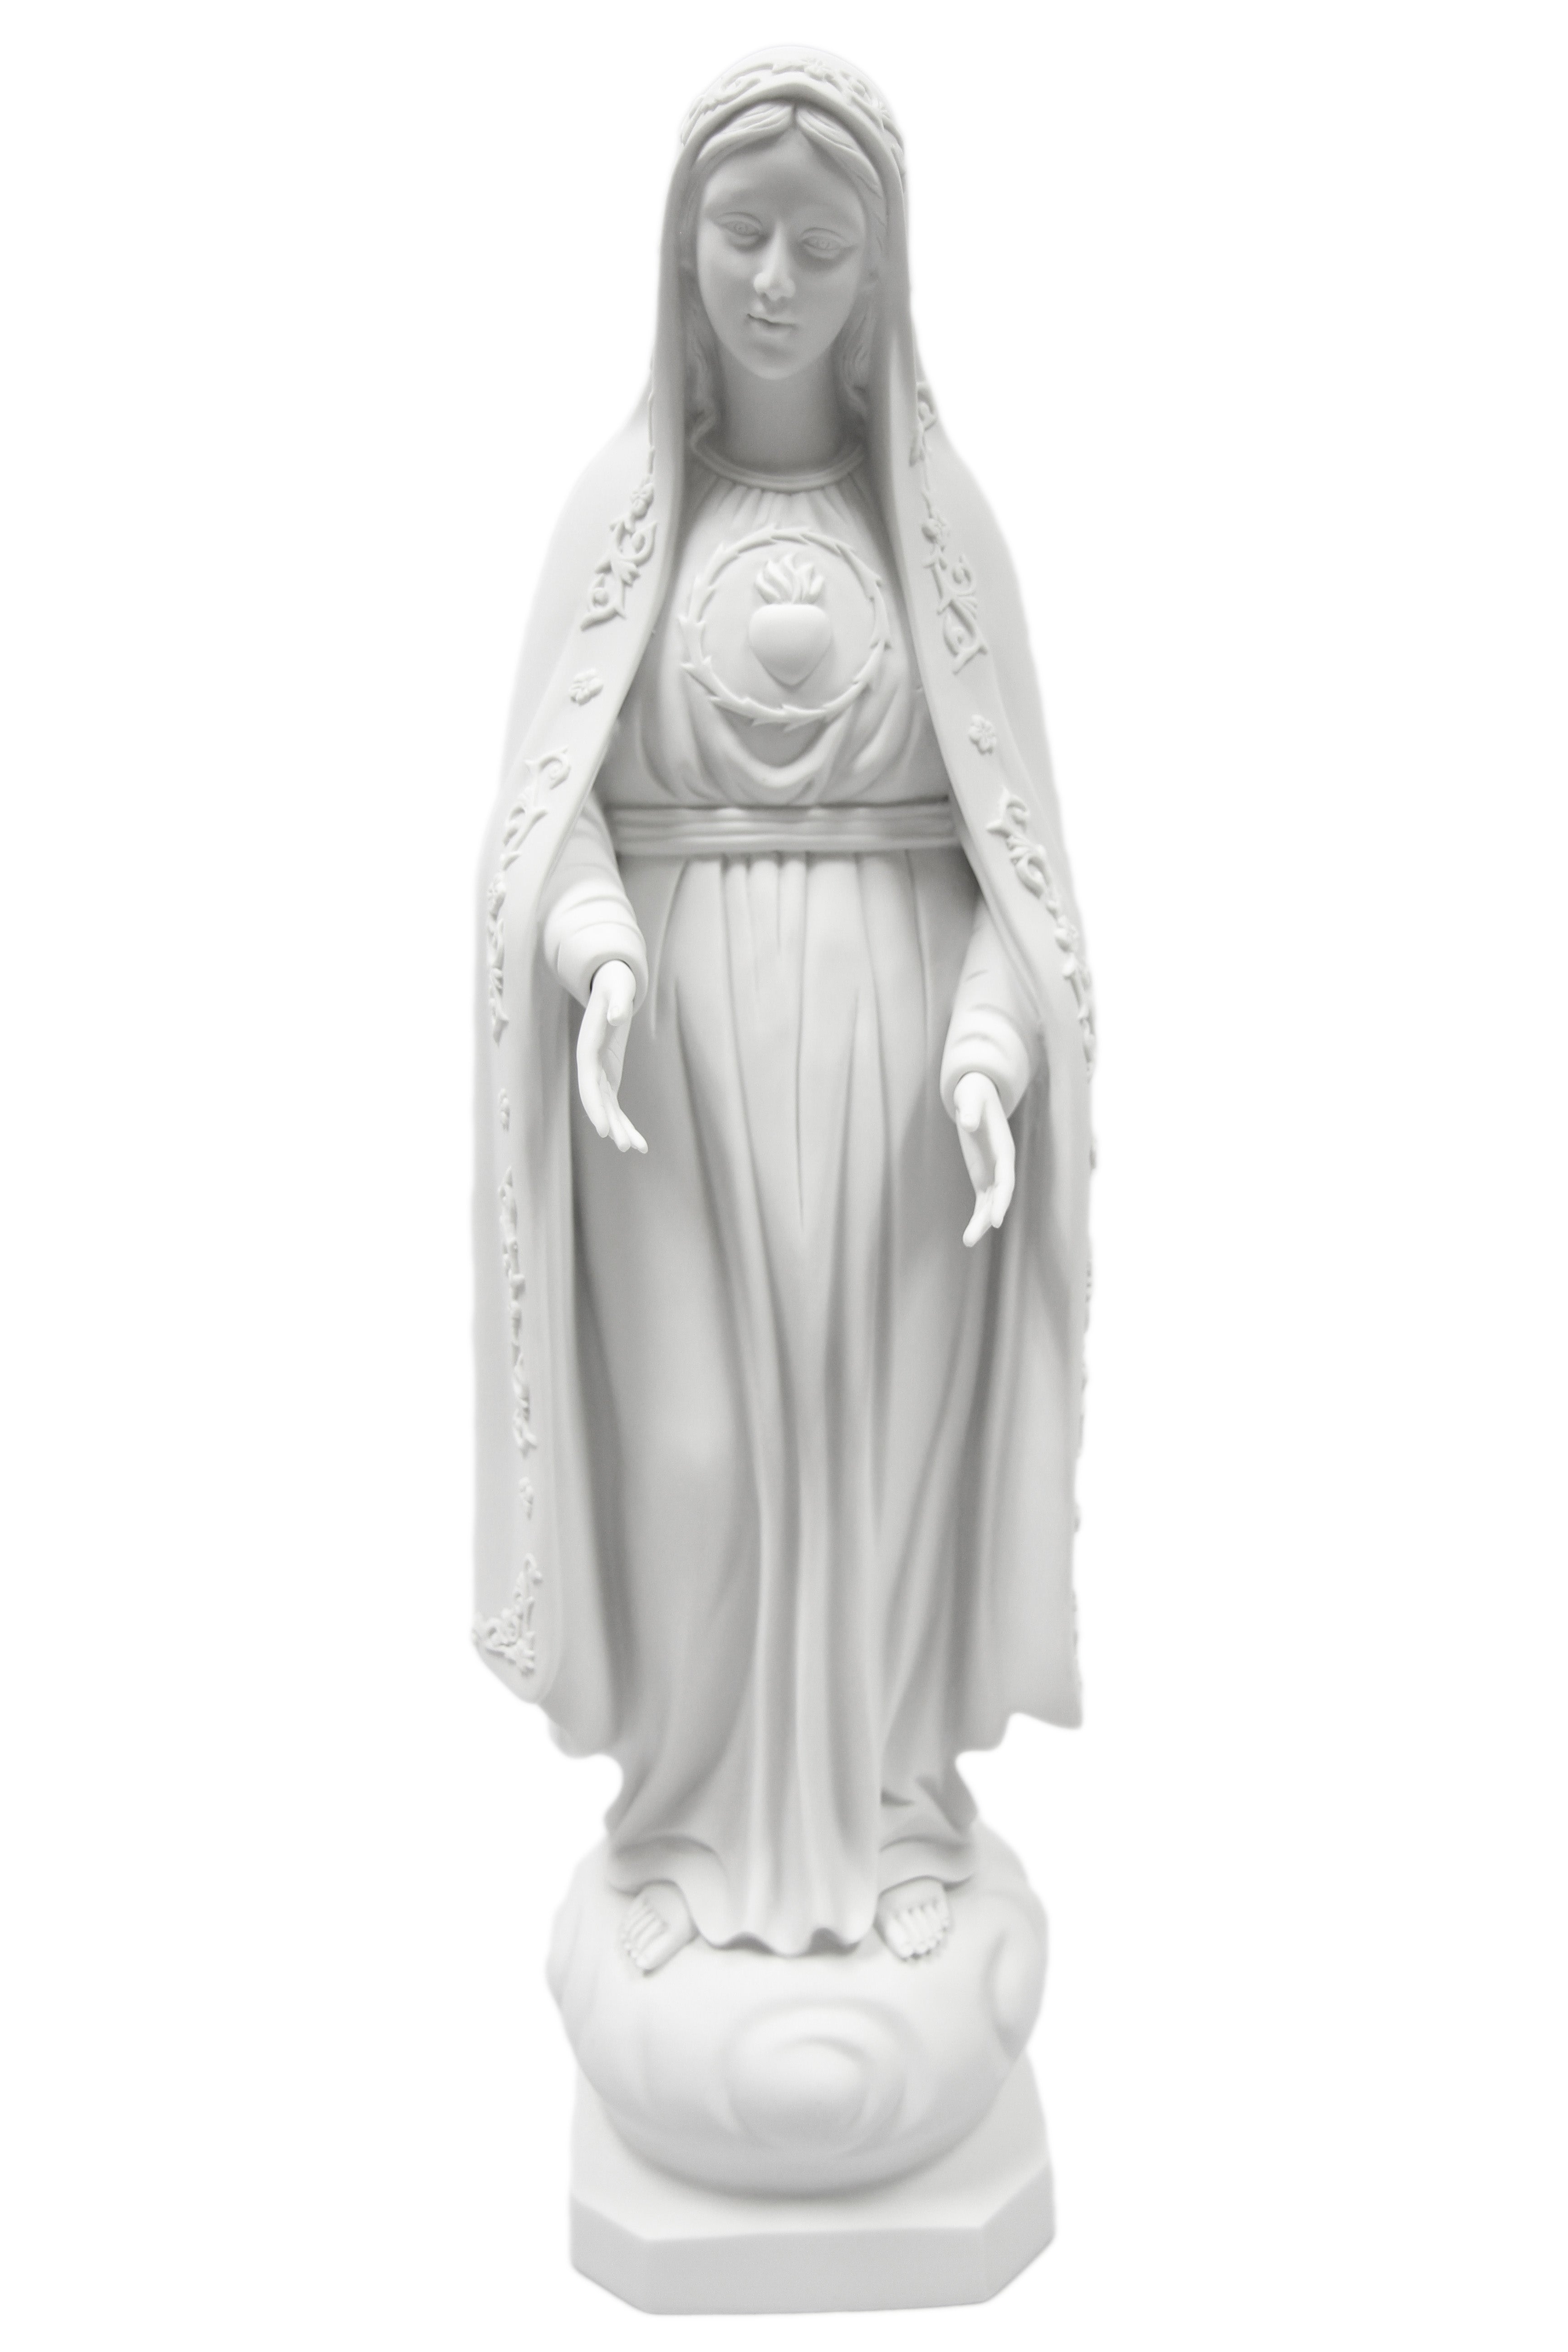 24 Inch Our Lady of Fatima Virgin Mary Catholic Statue Vittoria Collection Made in Italy Religious